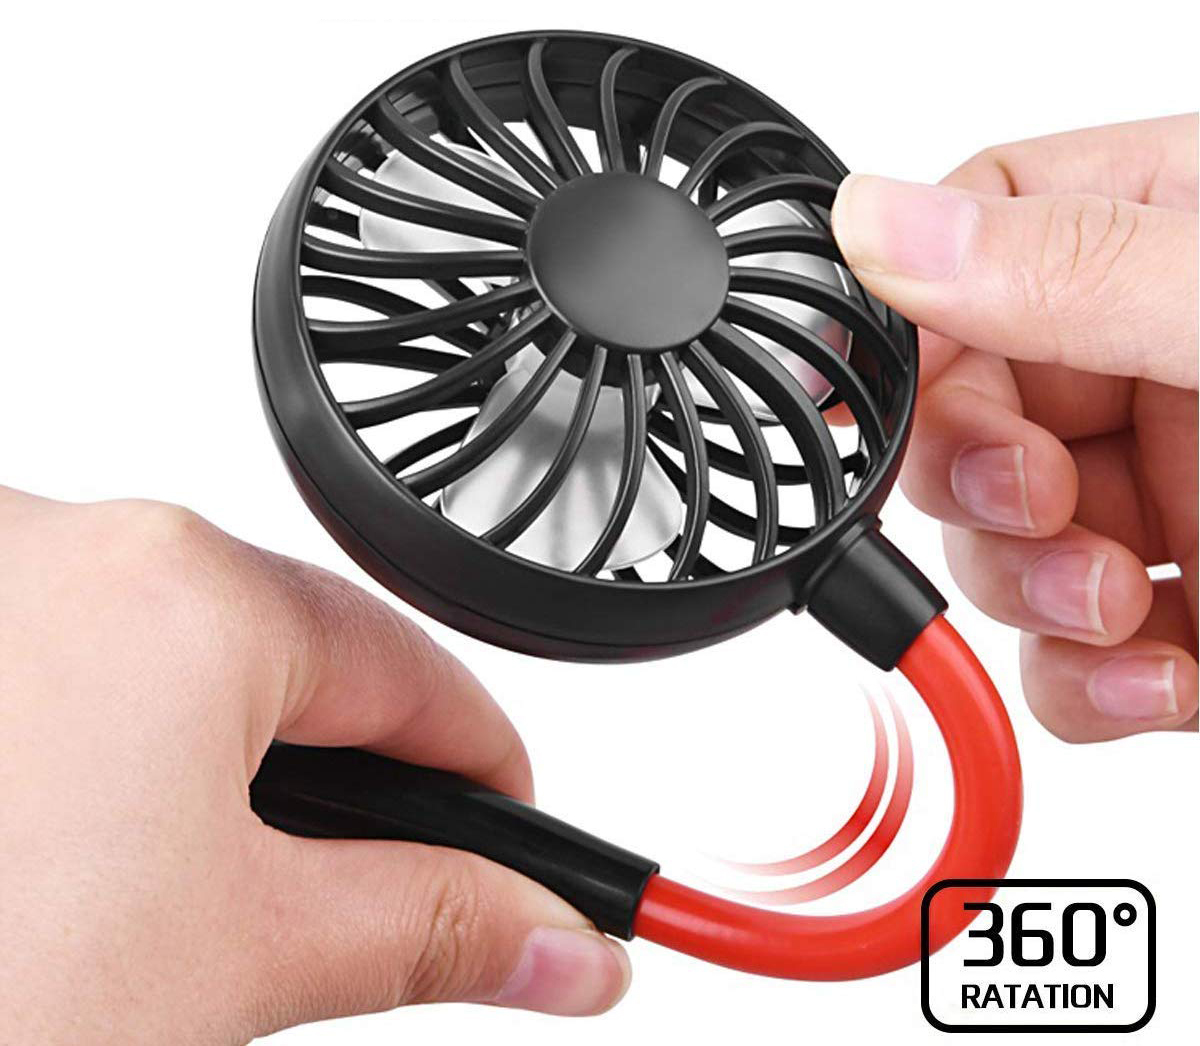 USB Fan Portable 1PC LED Light USB Rechargeable Neckband Lazy Neck Hanging Style Dual Cooling Fan Mini Hand Free Fan%20(6)